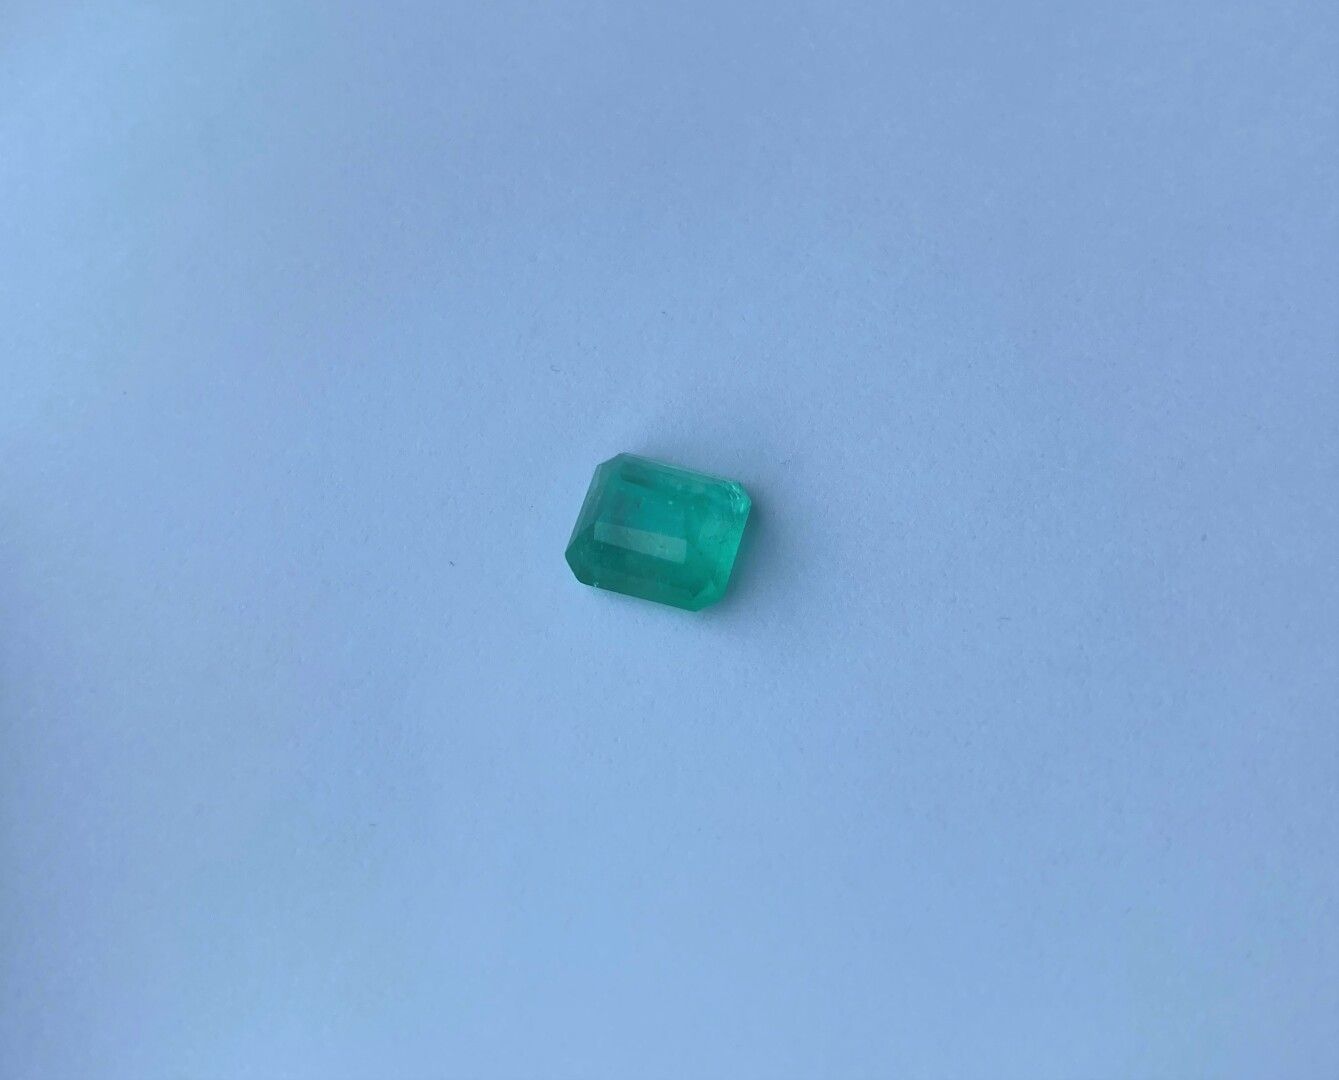 Null Faceted Emerald - Origin : Colombia - Weight about 2.74 carats - treatment
&hellip;